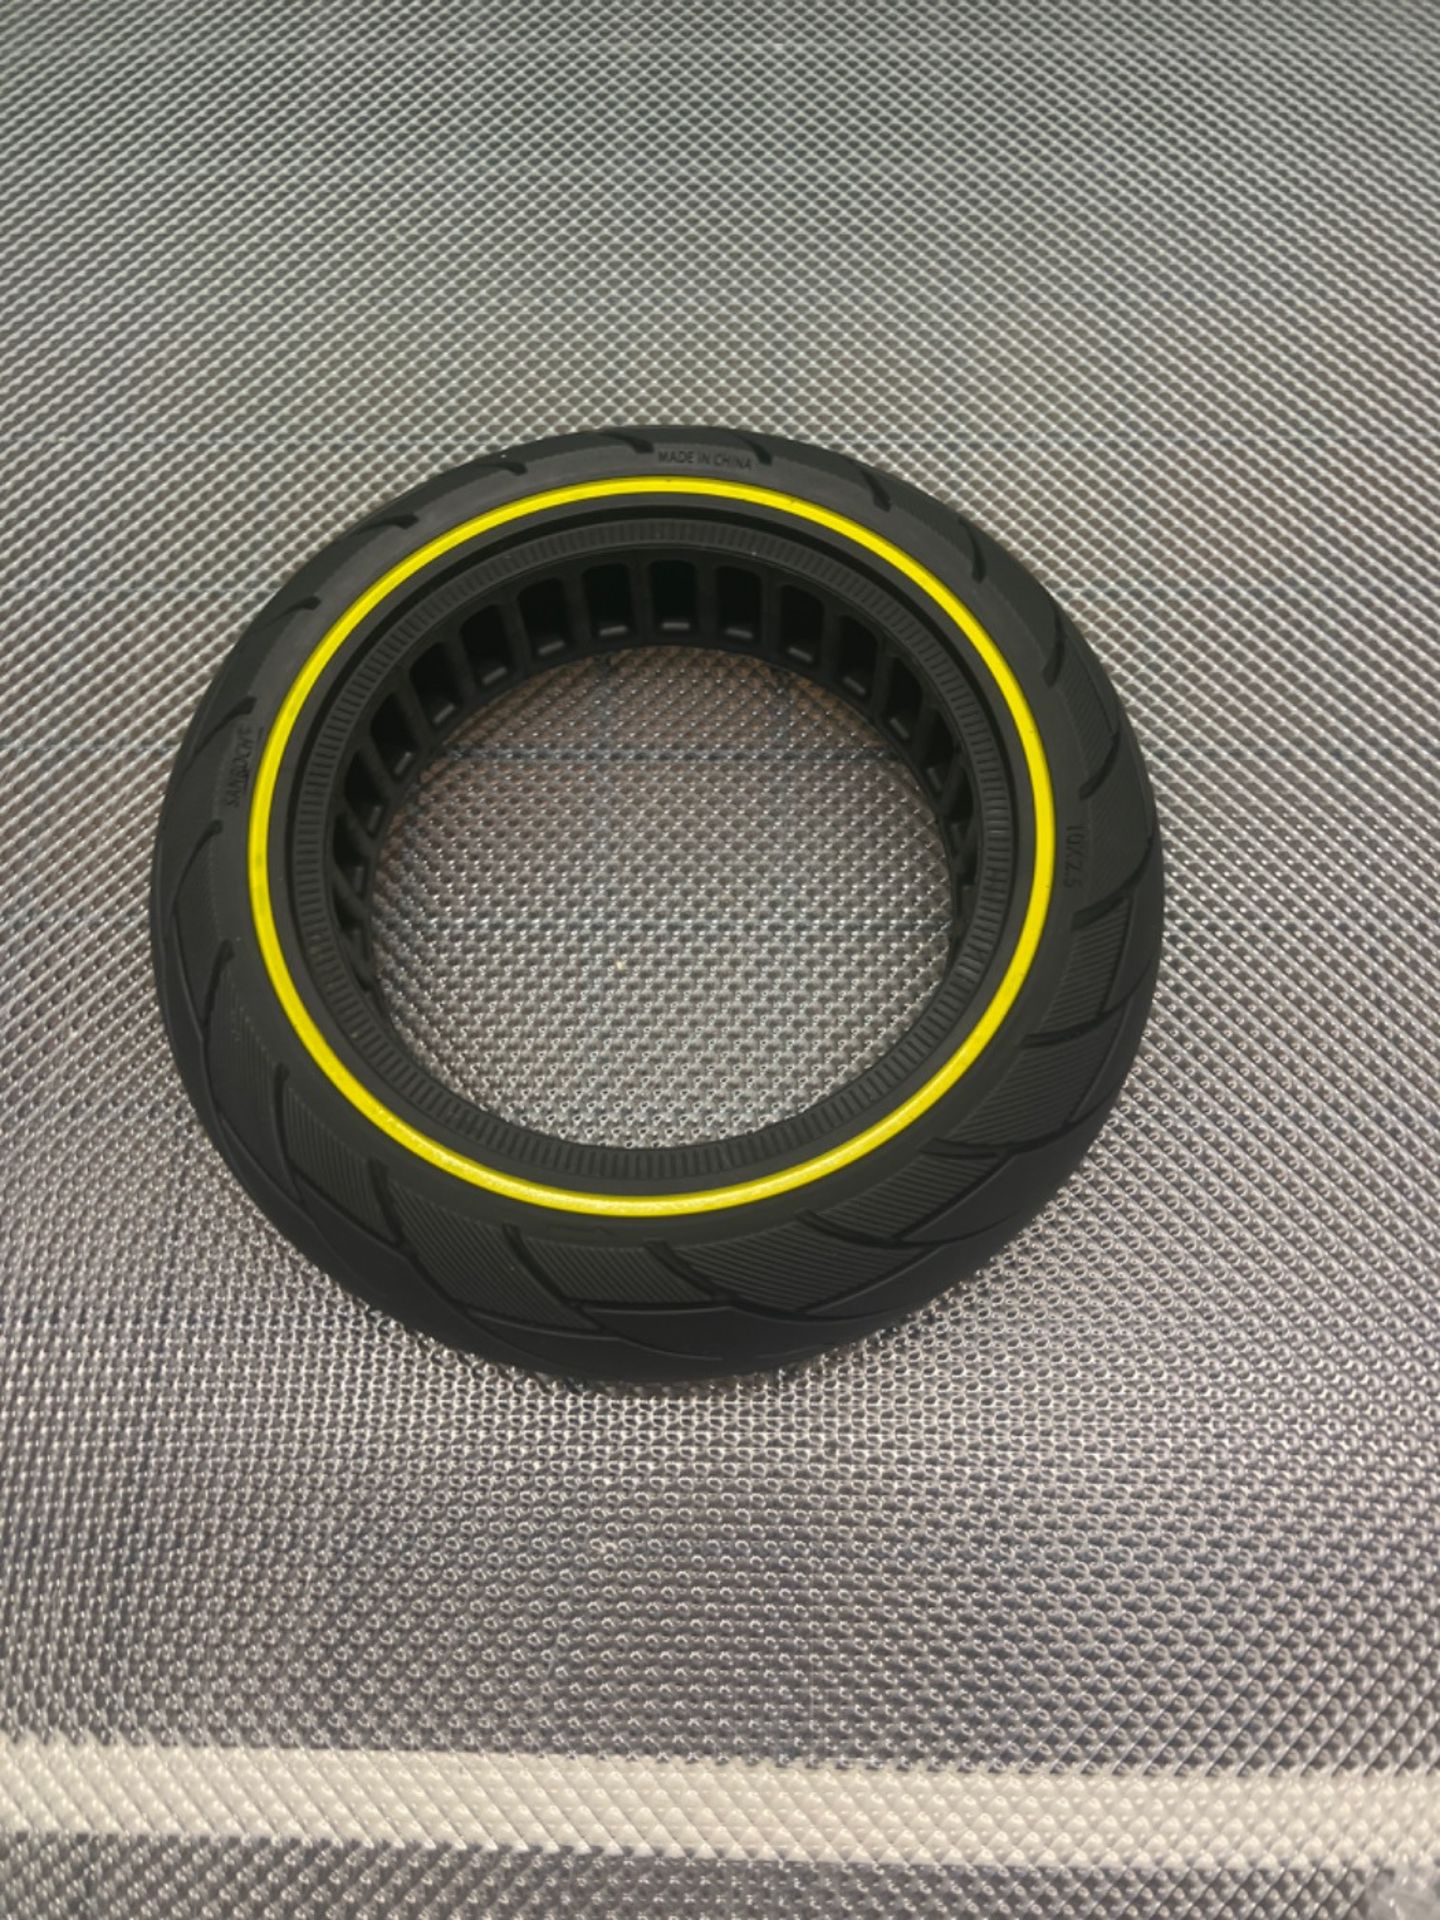 1PZ UKS-T05 10x2.50 Solid Tyre 10x2.5-6.5 Electric Scooter Tubeless Tyre Tire 10 Inch Honeycomb Tyr - Image 2 of 3